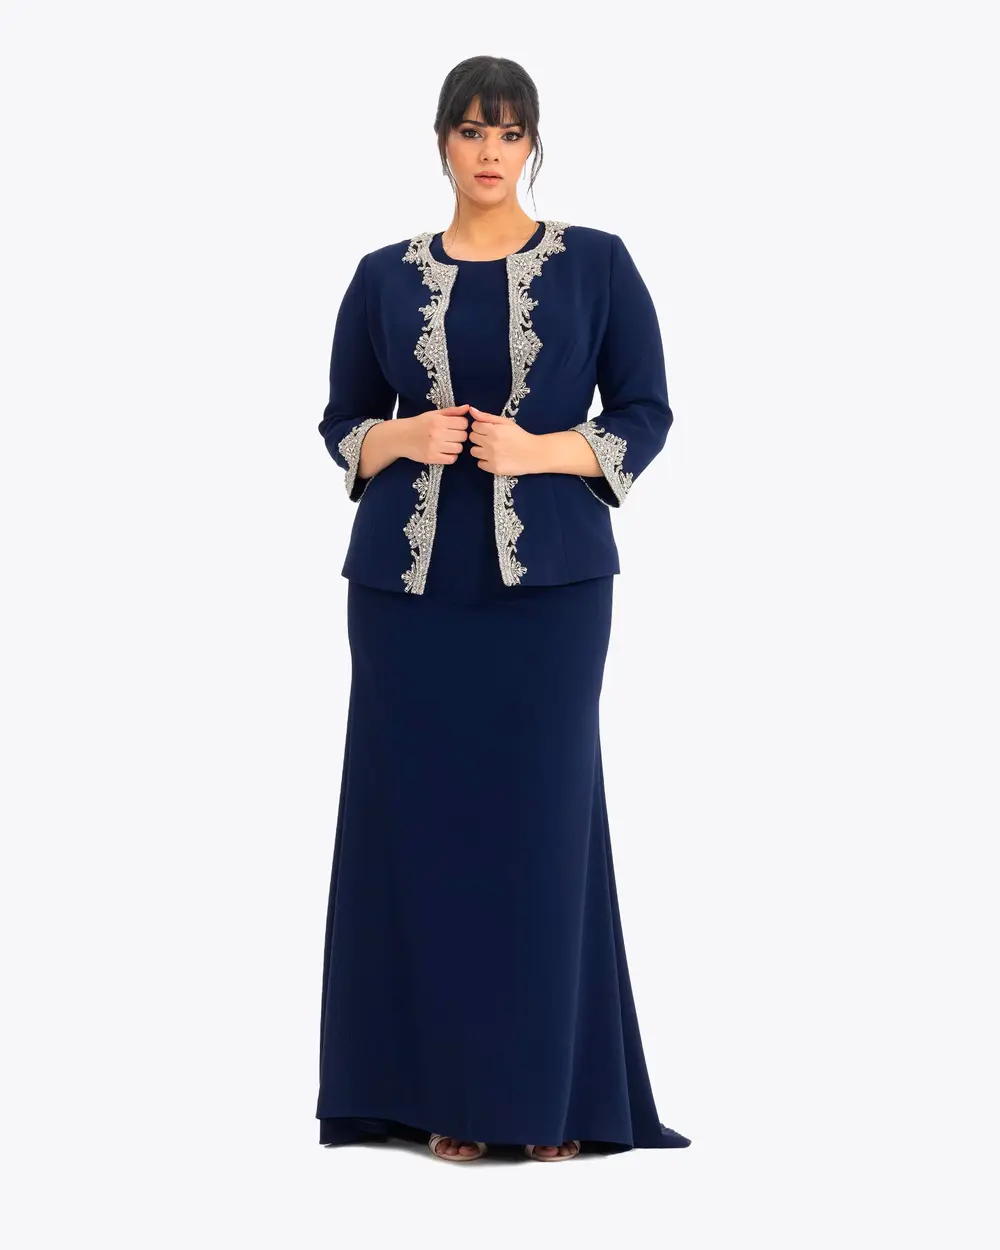 Crepe Fabric Two Piece Evening Dress with Indian Accessories